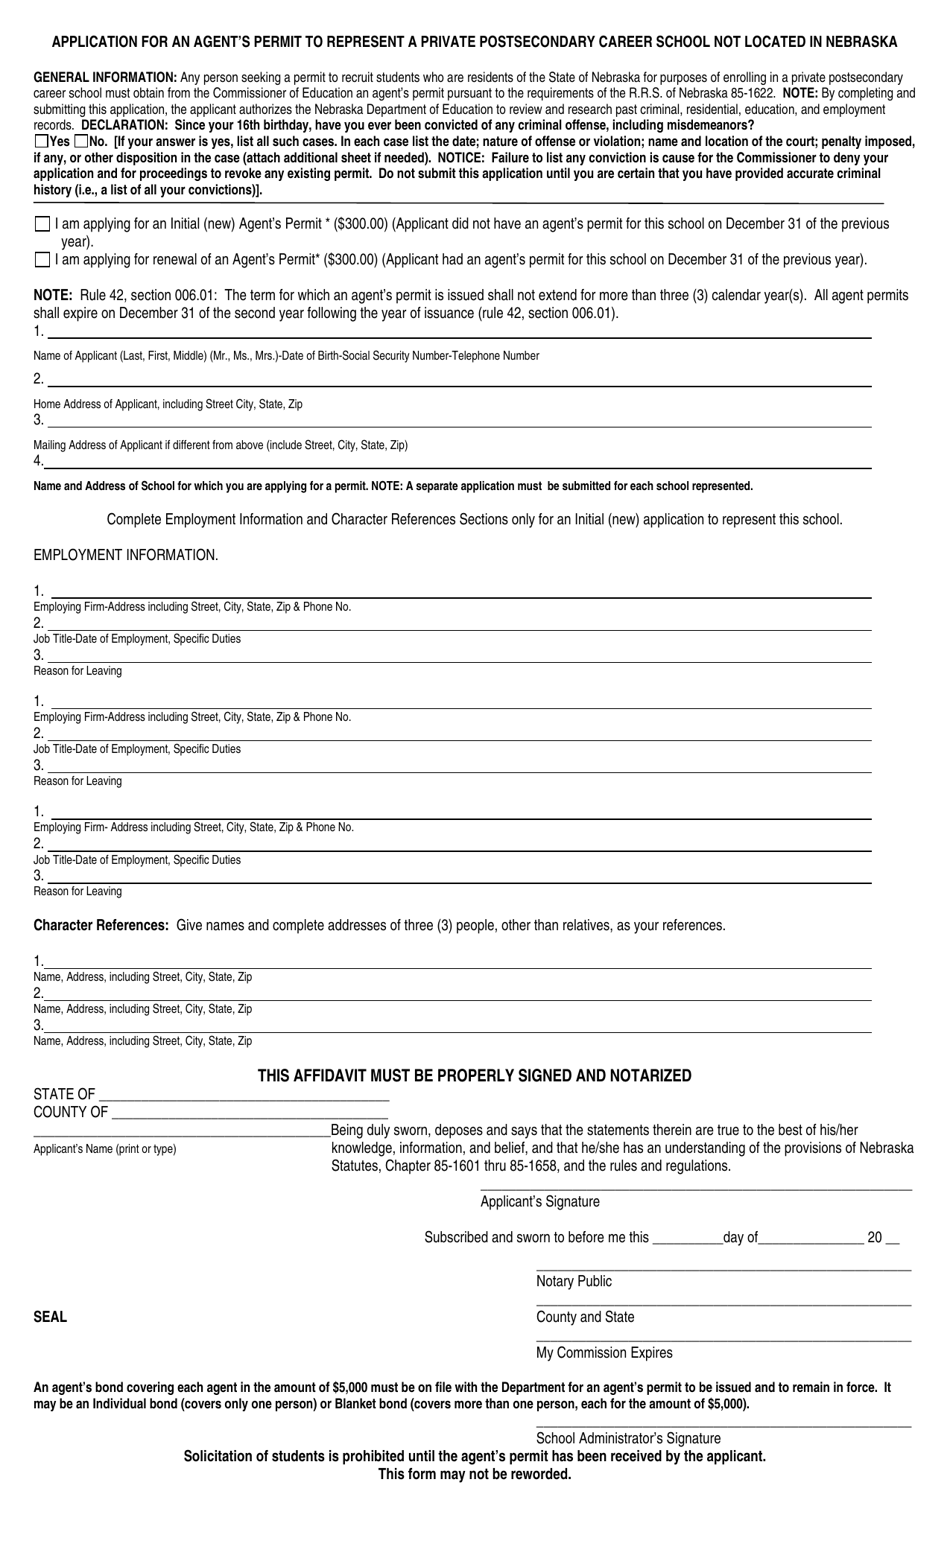 Application for an Agents Permit to Represent a Private Postsecondary Career School Not Located in Nebraska - Nebraska, Page 1